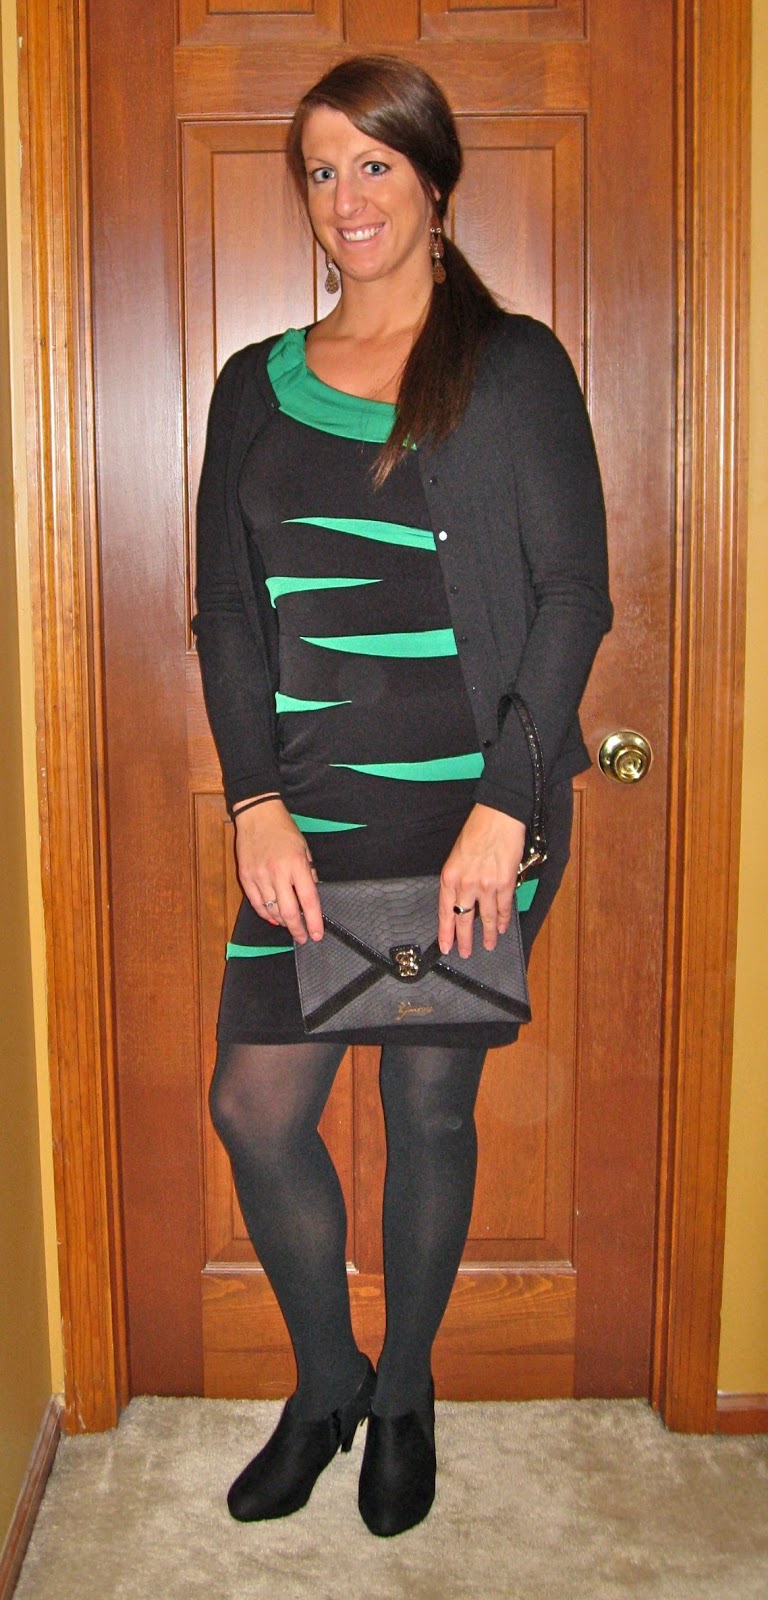 Ask Away Blog: Outfit of the Day: Elegant Green and Black